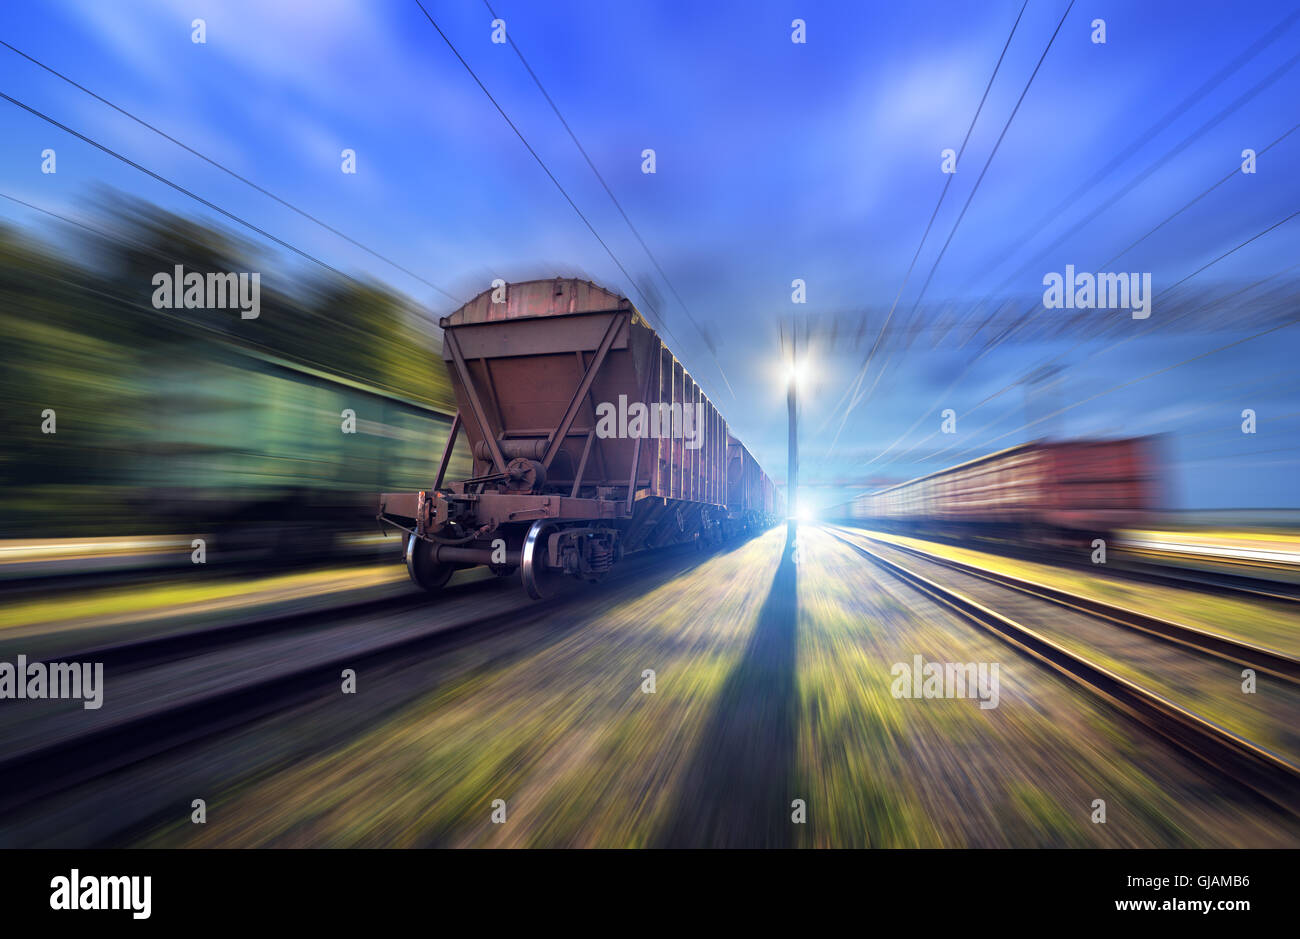 Railway station with cargo wagons and train light in motion at night. Railroad with motion blur effect. Heavy industry Stock Photo